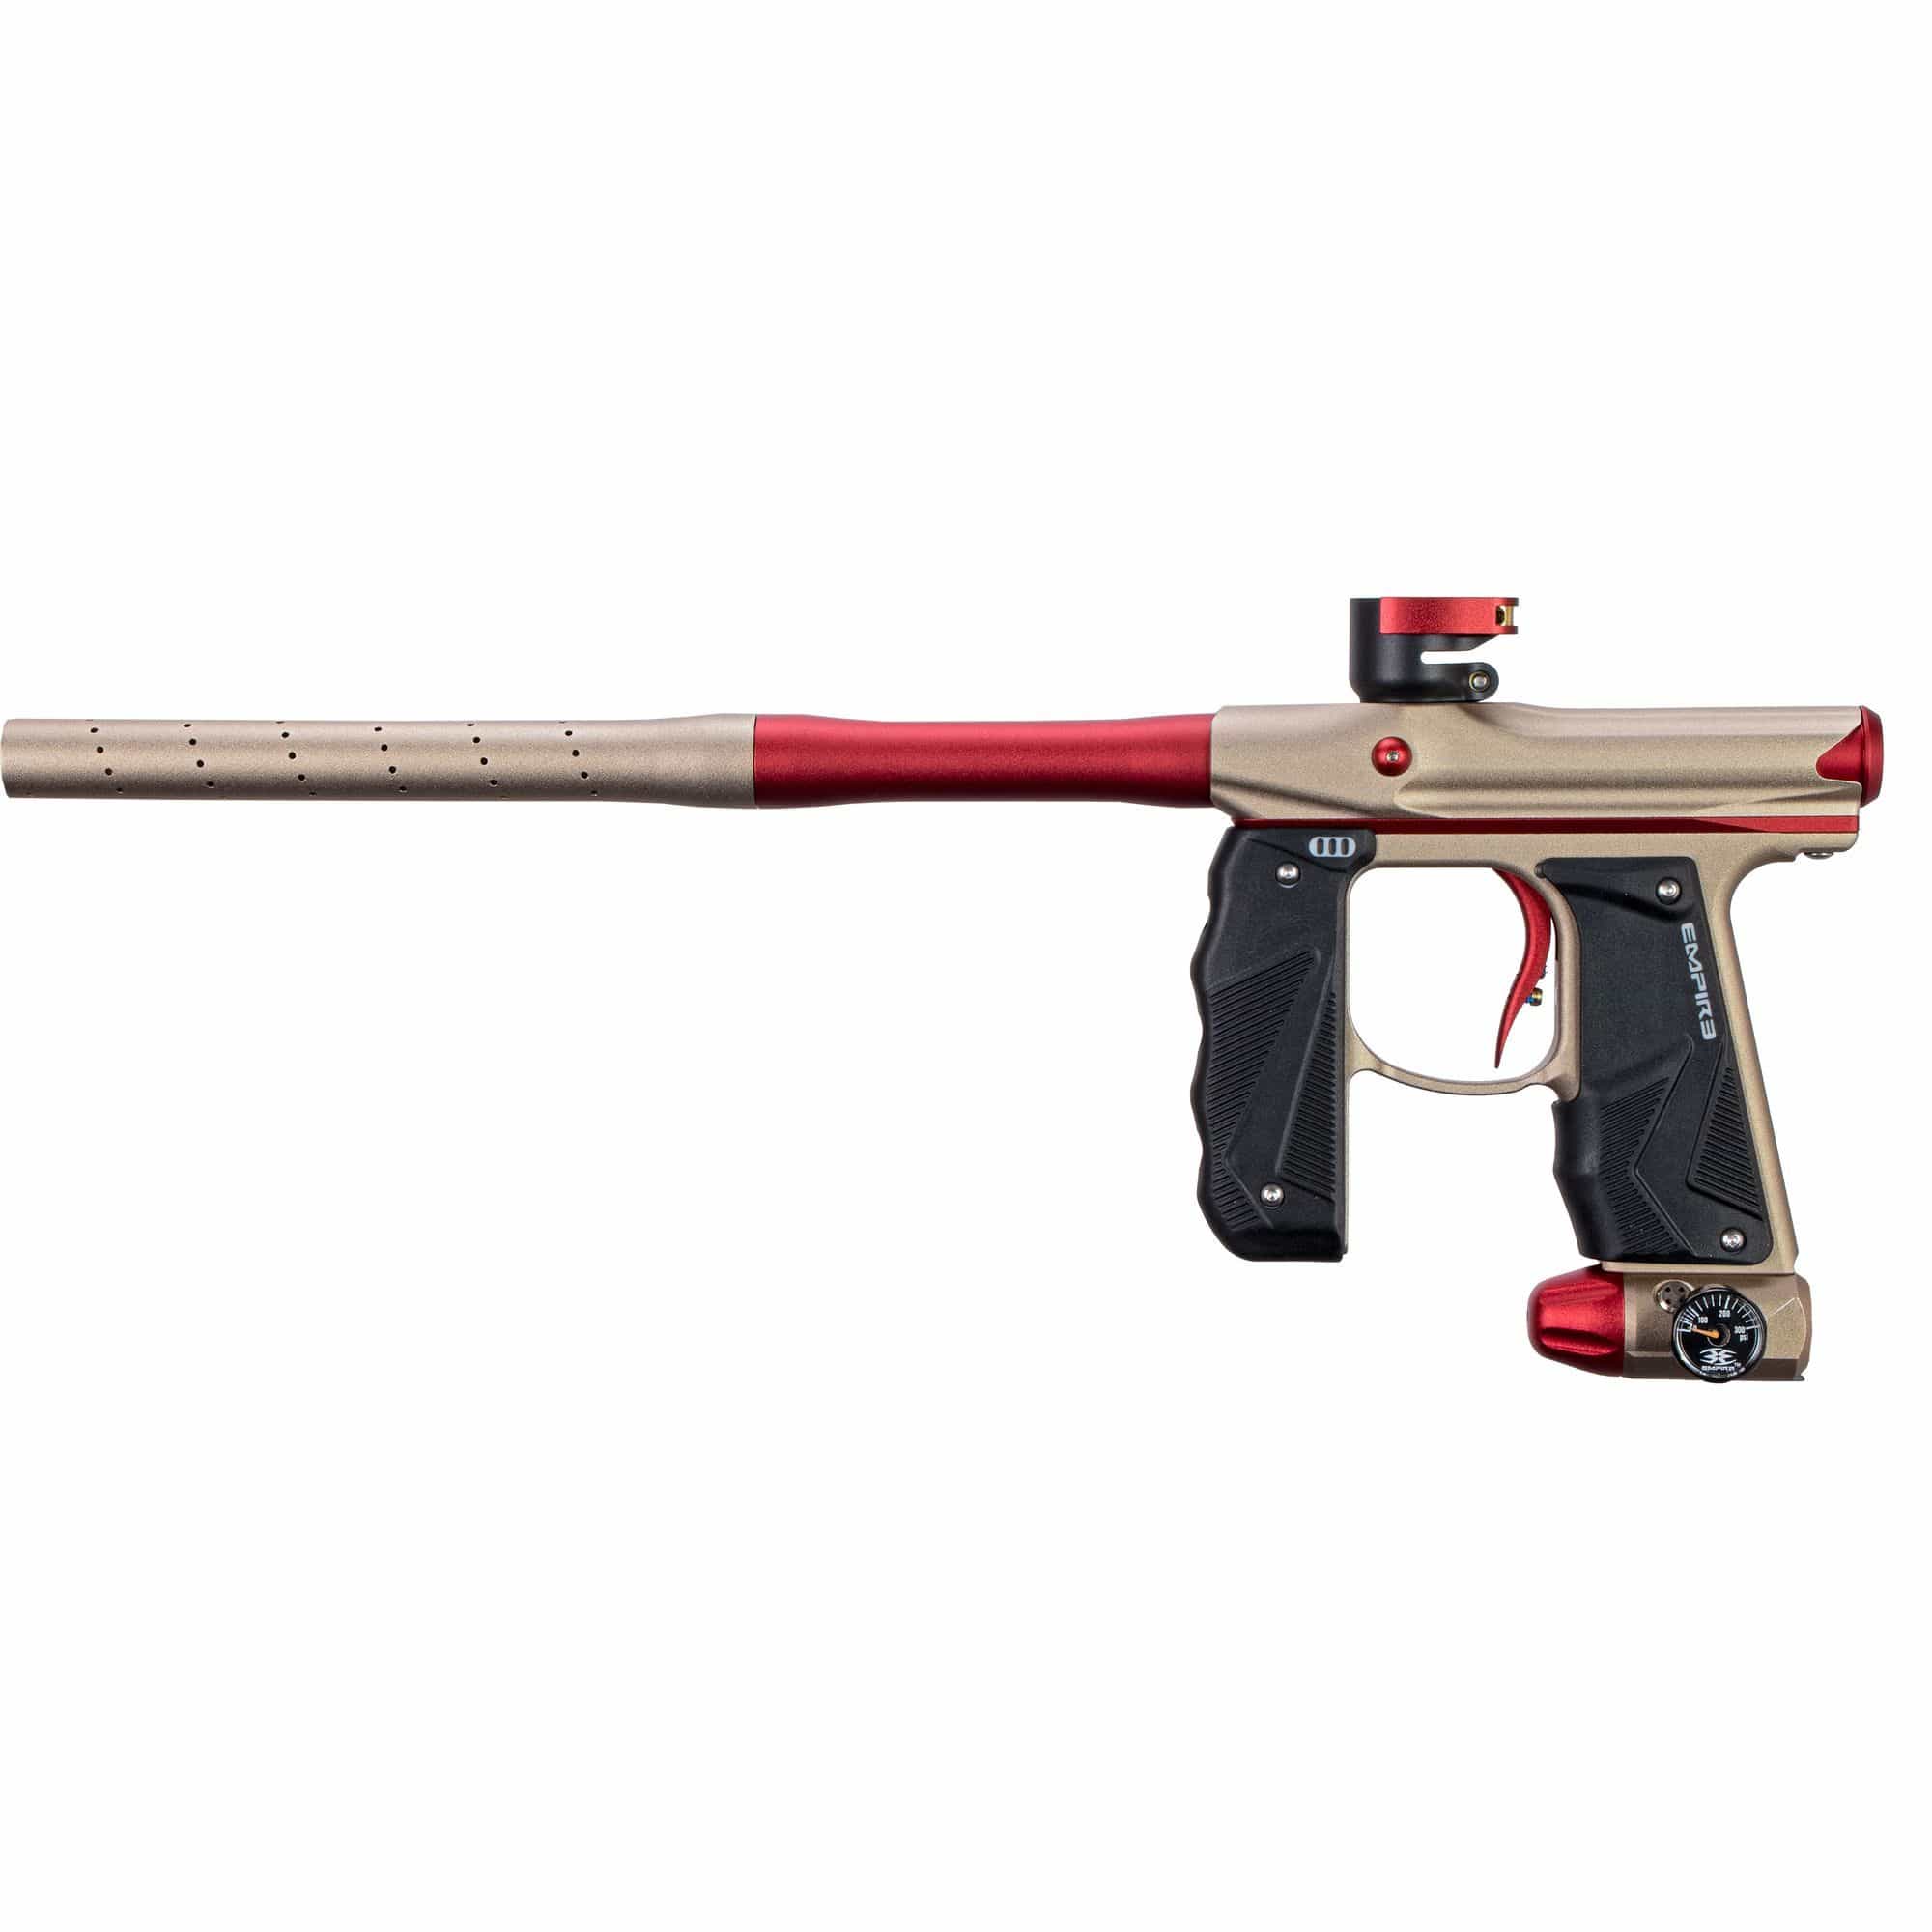 EMPIRE MINI GS PAINTBALL GUN W/ TWO PIECE BARREL- DUST TAN/RED - Eminent Paintball And Airsoft